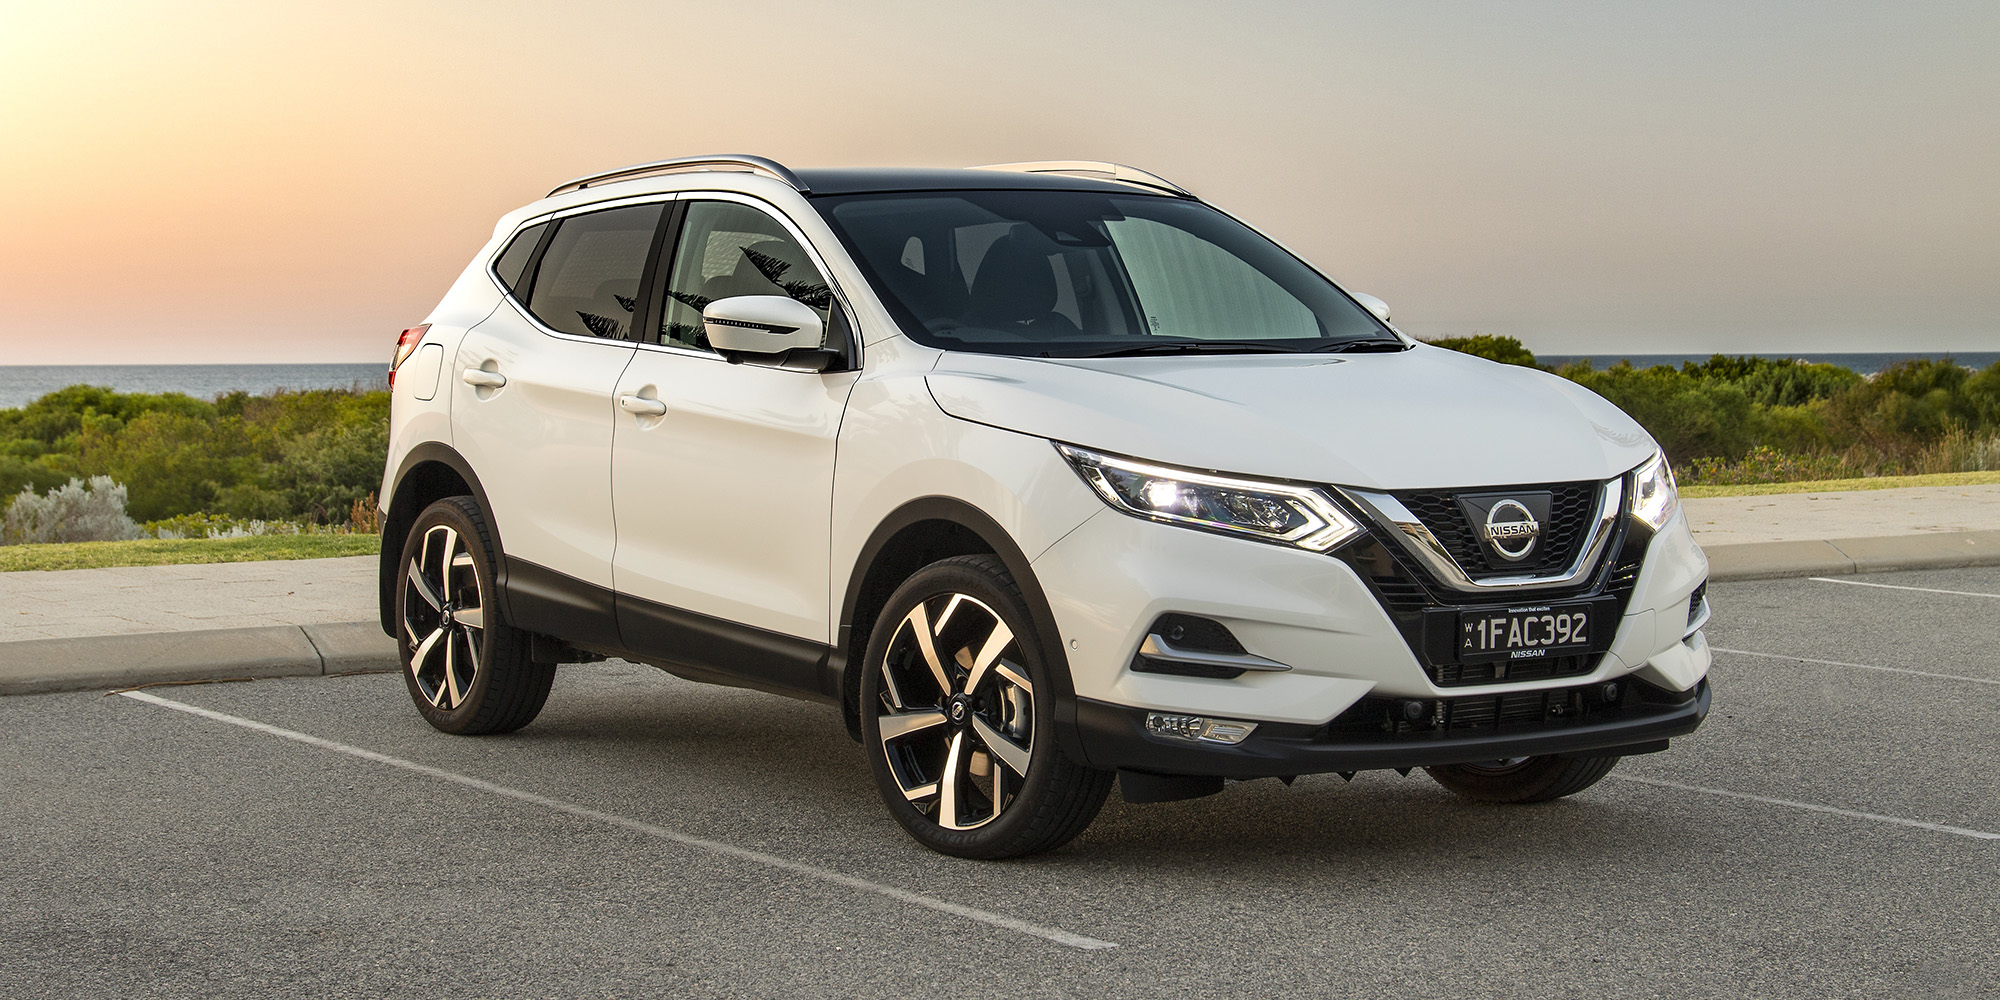 2018 Nissan Qashqai pricing and specs Photos (1 of 10)